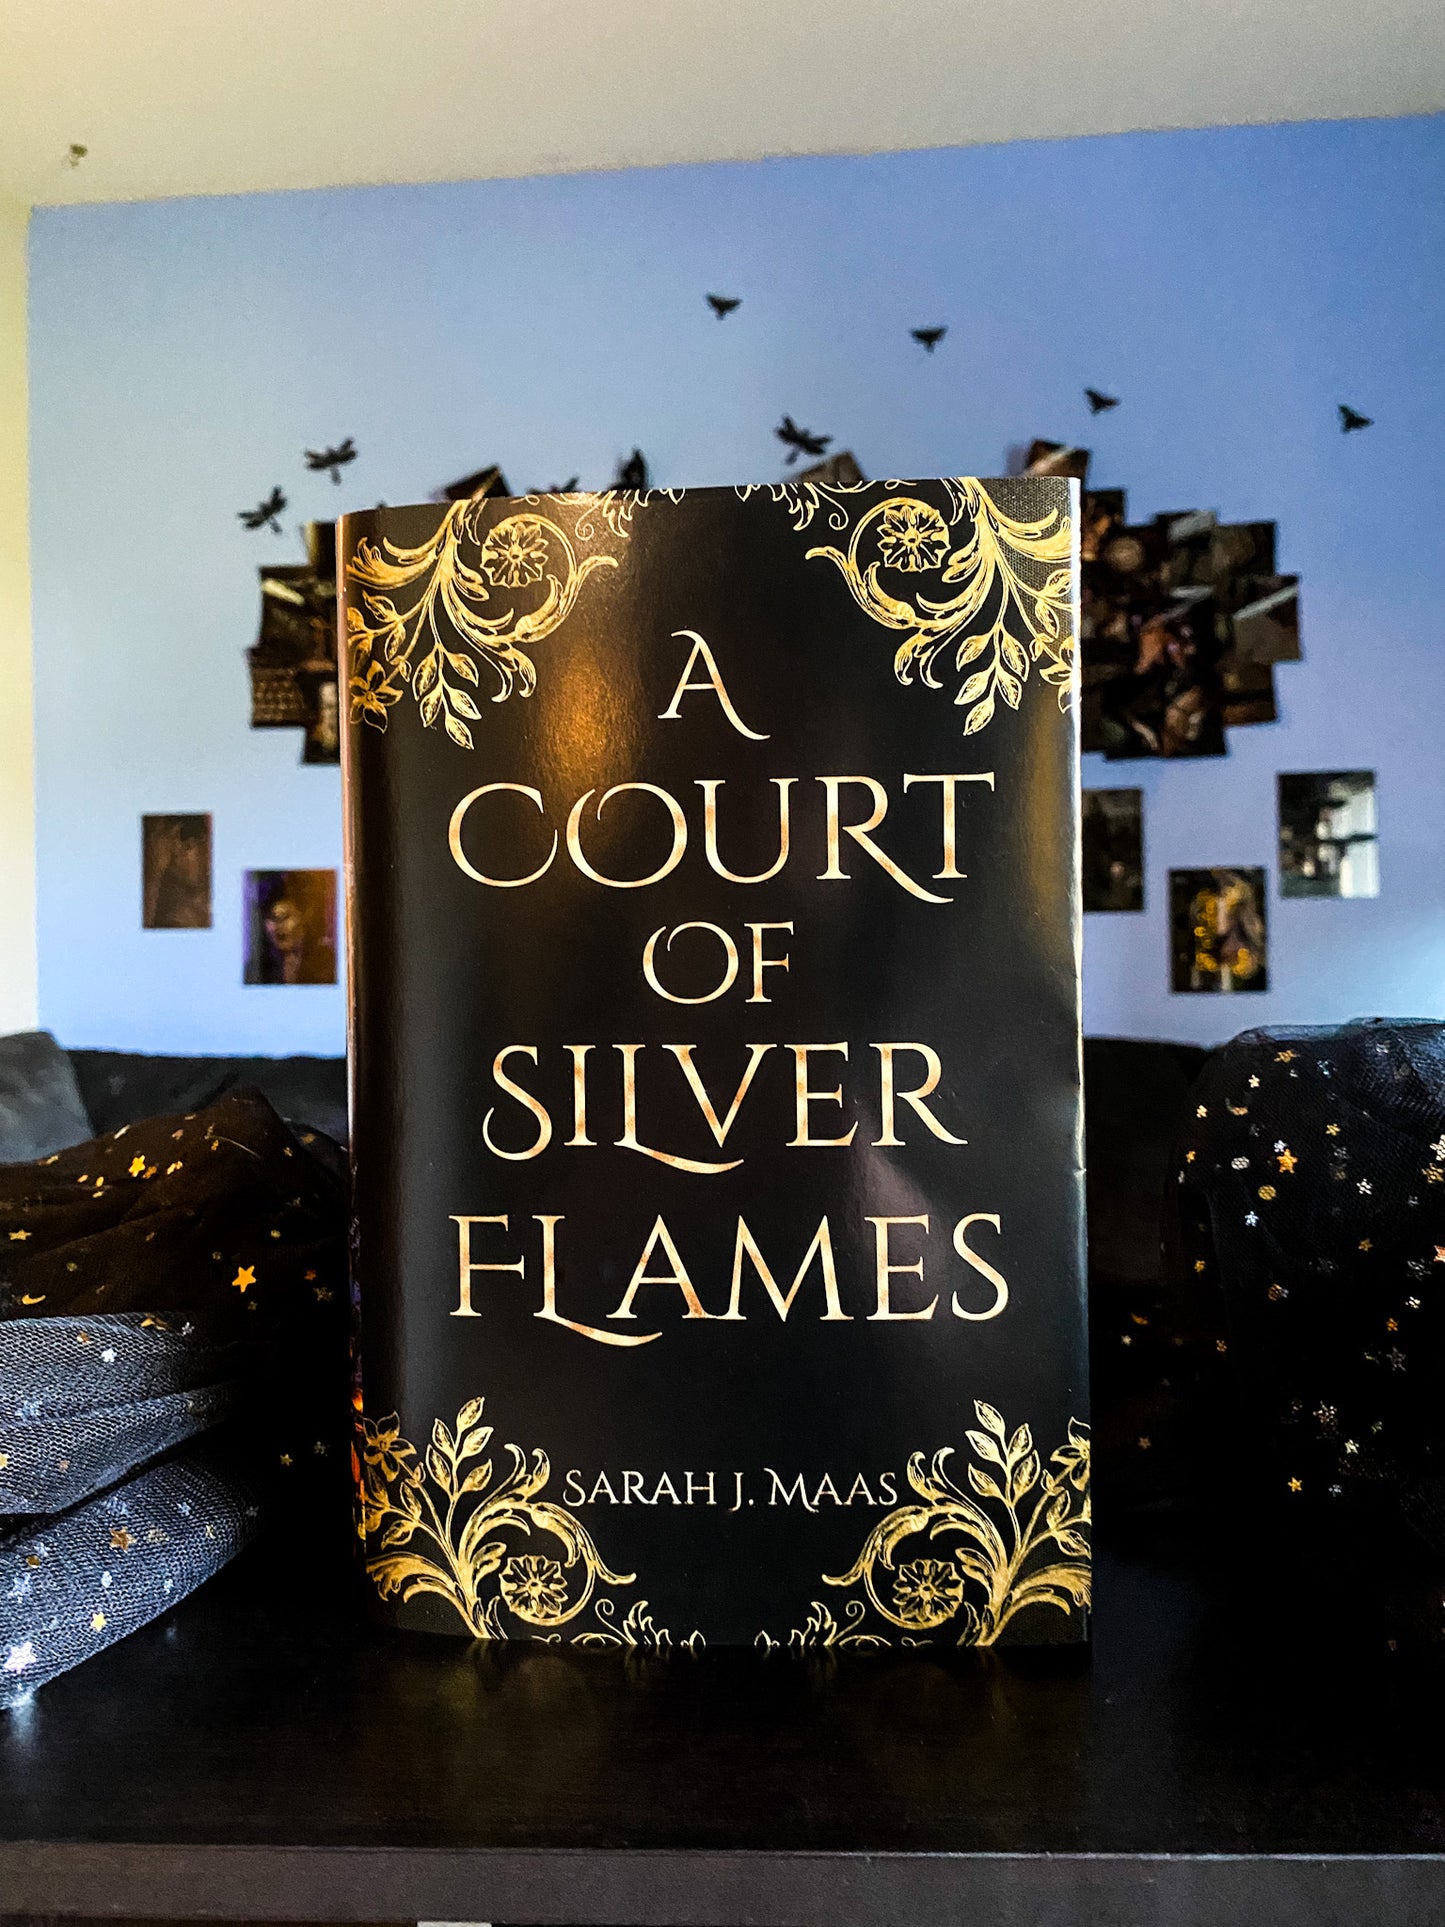 Velaris X ACOTAR Special Edition Book Box Set with Velaris Printed Pages